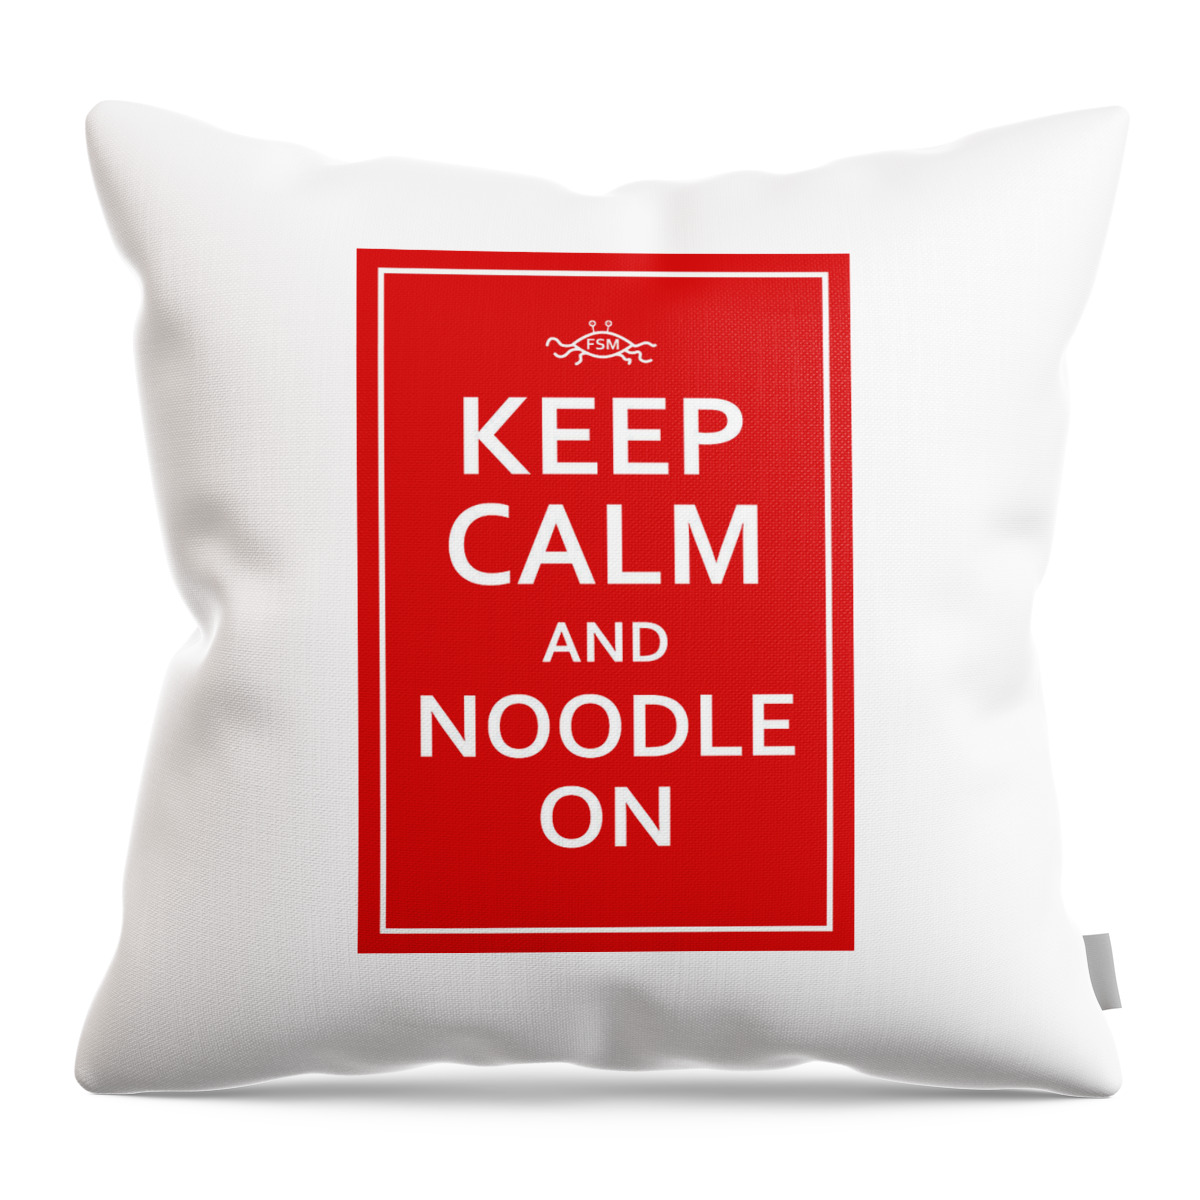 Richard Reeve Throw Pillow featuring the digital art FSM - Keep Calm and Noodle On by Richard Reeve